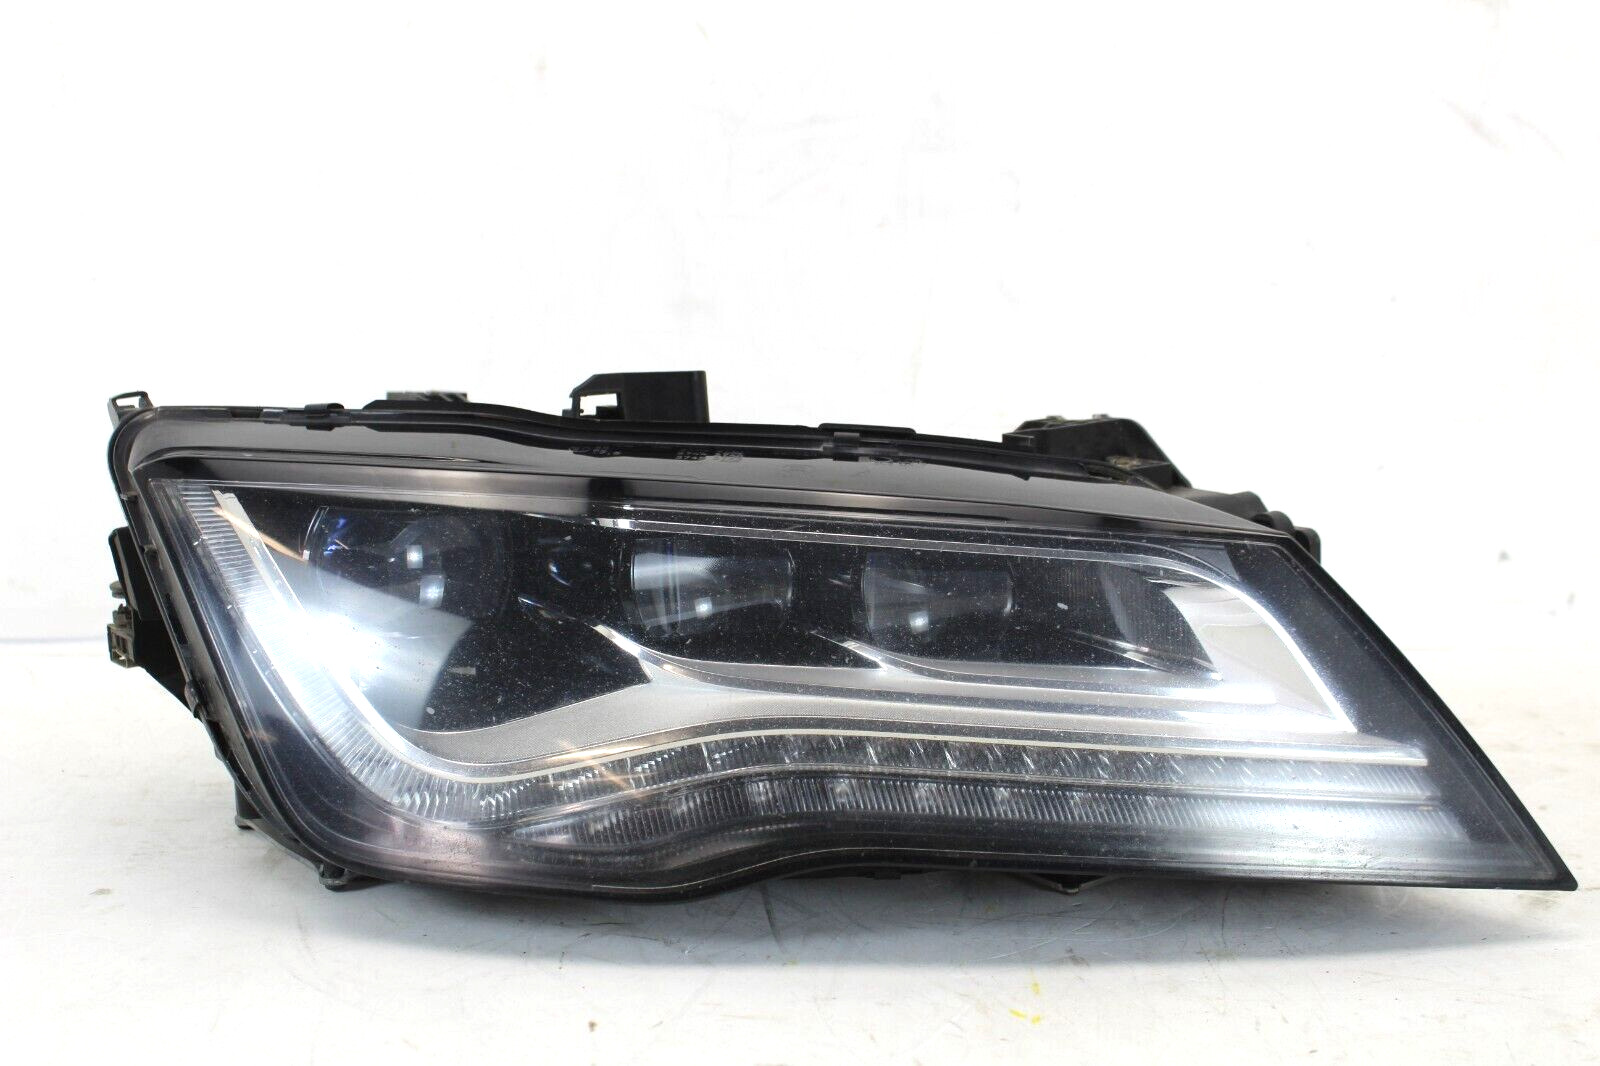 2012-2015 AUDI A7 S7 FRONT RIGHT PASSENGER SIDE HEADLIGHT ASSEMBLY LED #4146